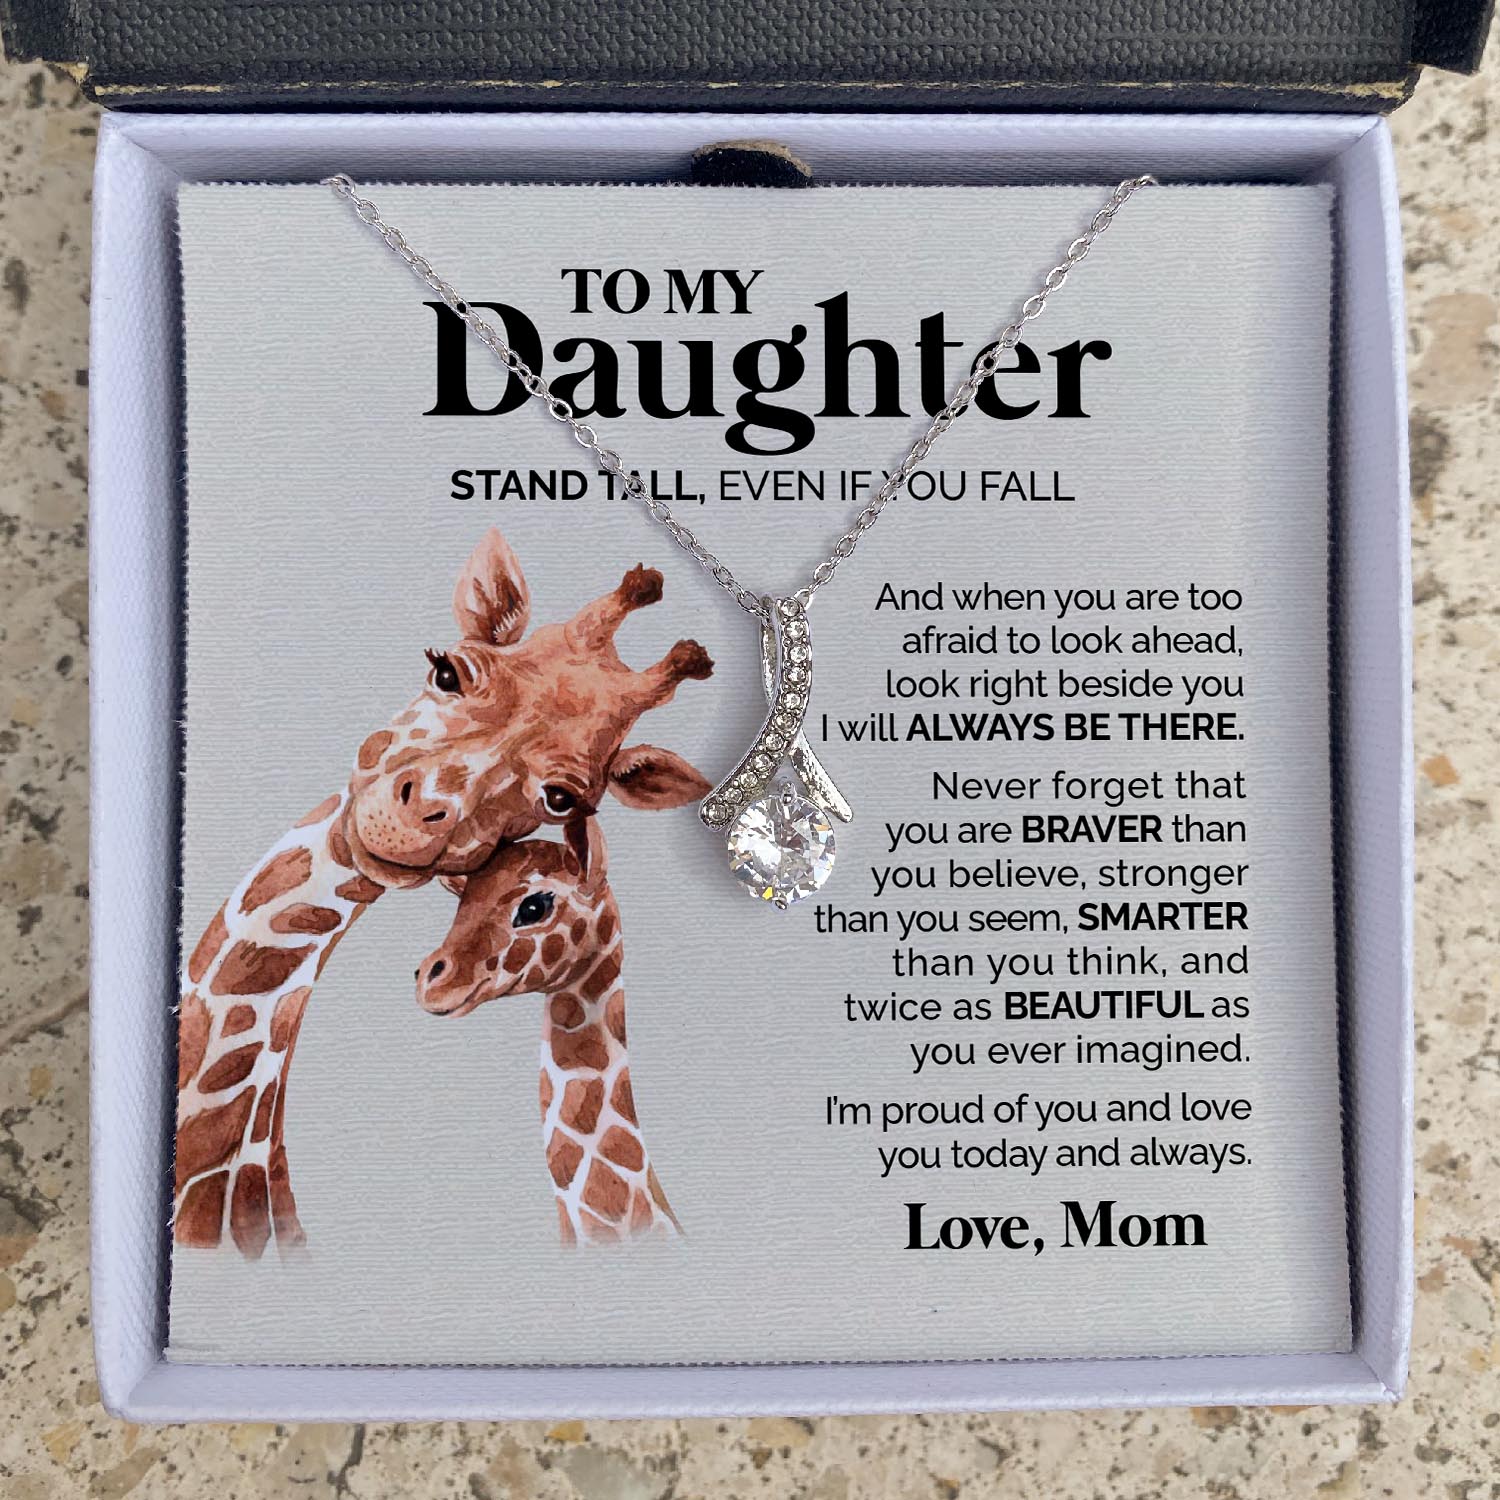 ShineOn Fulfillment Jewelry 14K White Gold Finish / Two-Toned Box To my Daughter from Mom - Stand tall - Ribbon Necklace